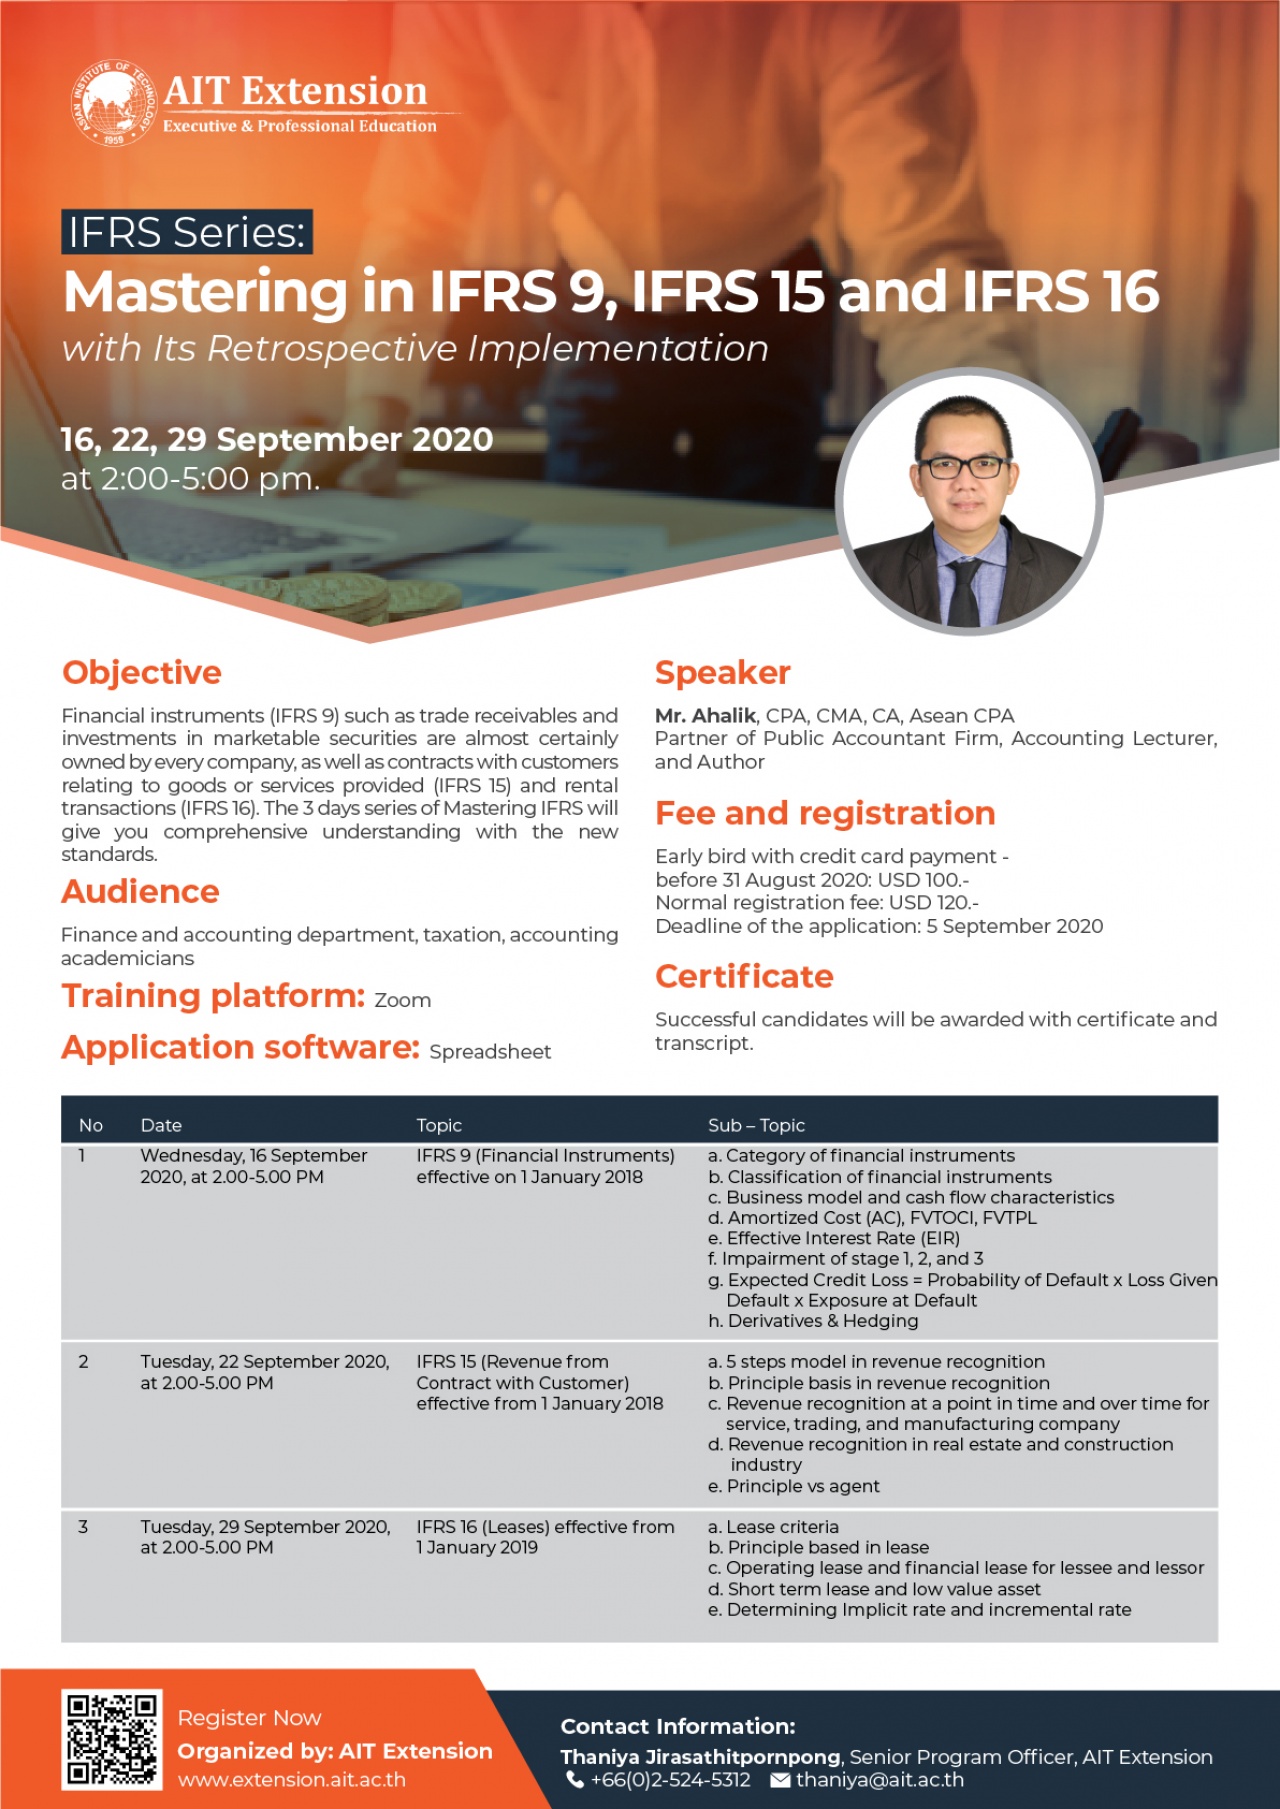 IFRS Seires: Mastering in IFRS 9, IFRS 15 and IFRS 16 with Its Retrospective Implementation